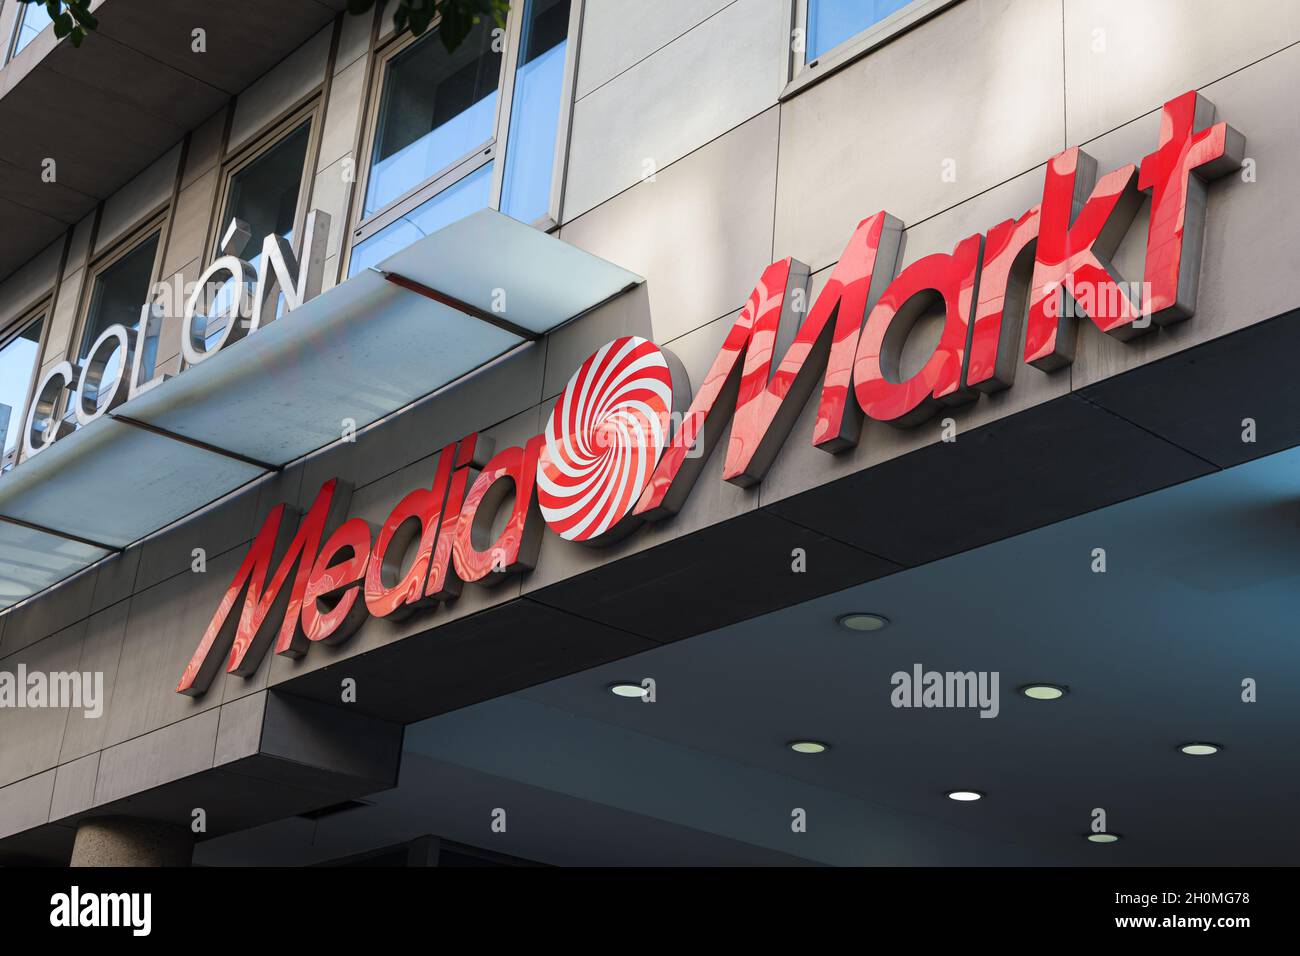 MediaMarkt - Media Markt storefront in Eindhoven NL - Media Markt is a  German multinational chain of consumer electronics stores with over 1000  stores Stock Photo - Alamy